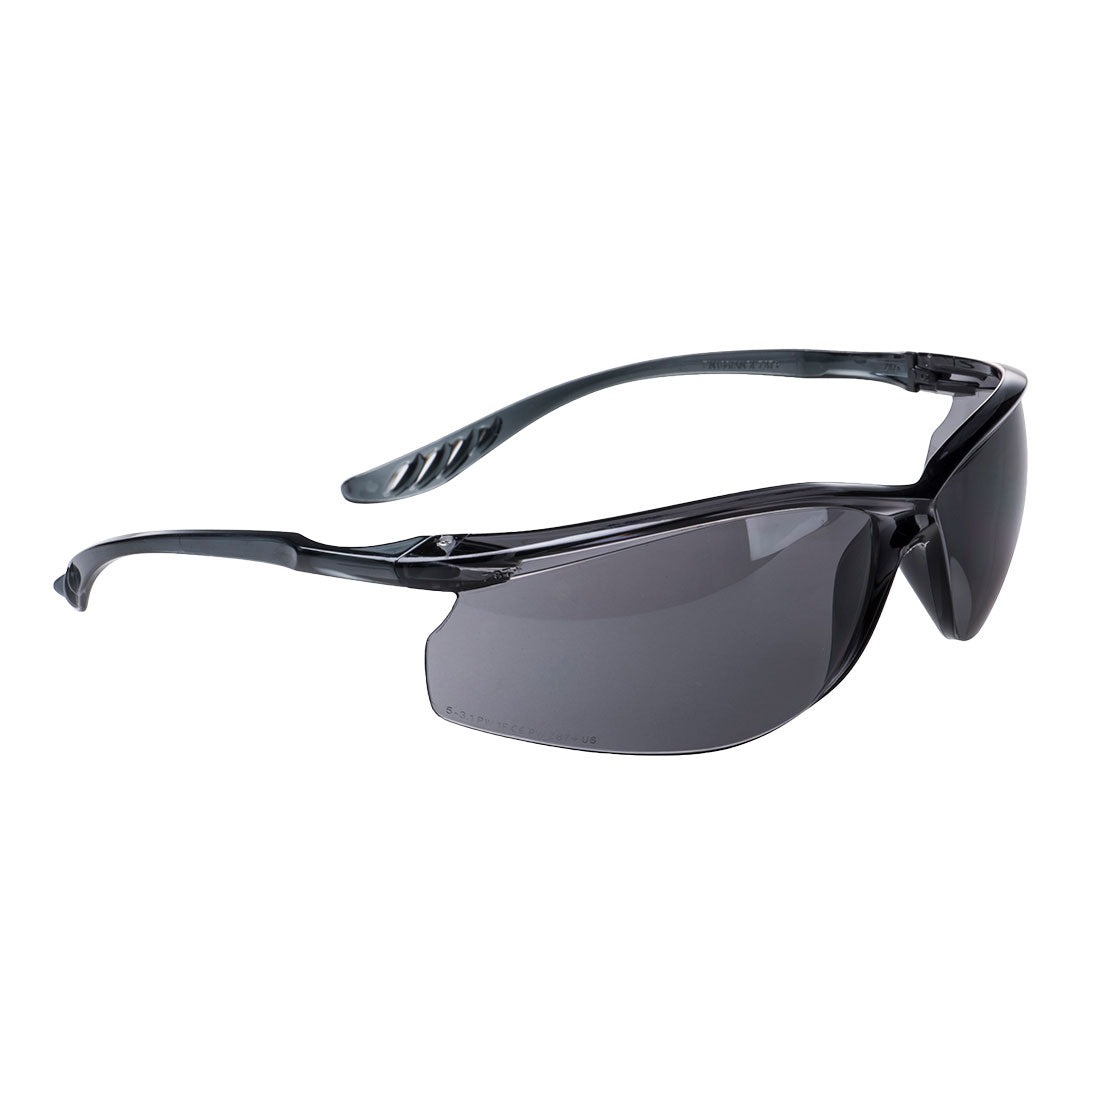 PW14 - Lite Safety Glasses (Pack of 5)